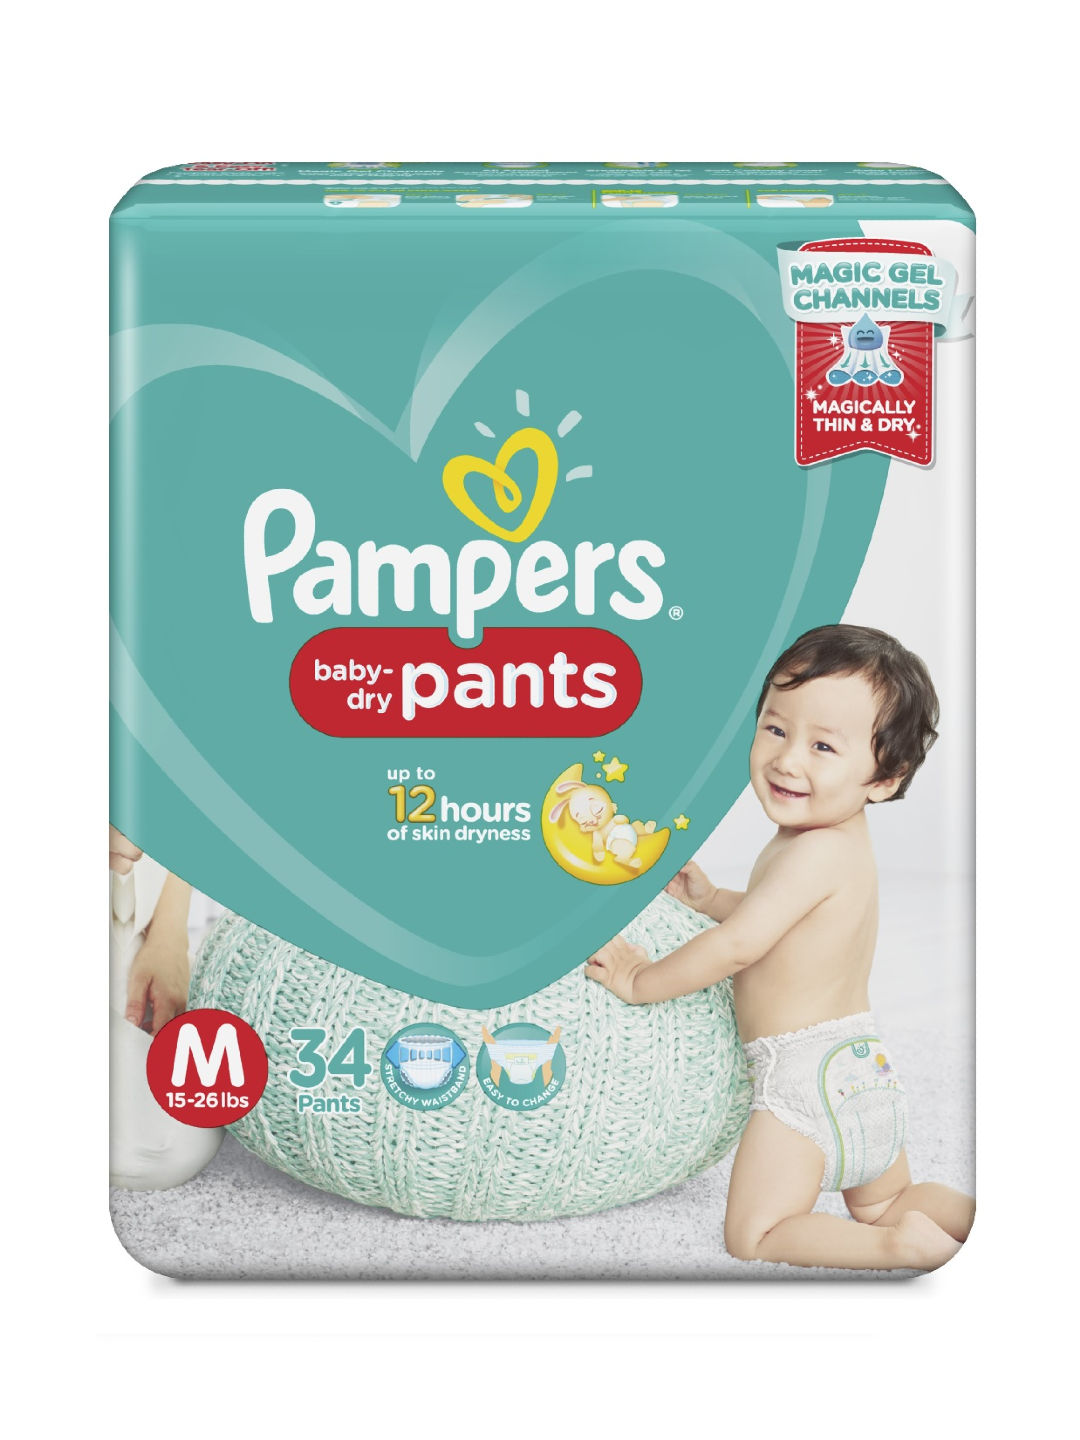 Pampers All-Round Protection Diaper Pants Medium, 6 Count Price, Uses, Side  Effects, Composition - Apollo Pharmacy